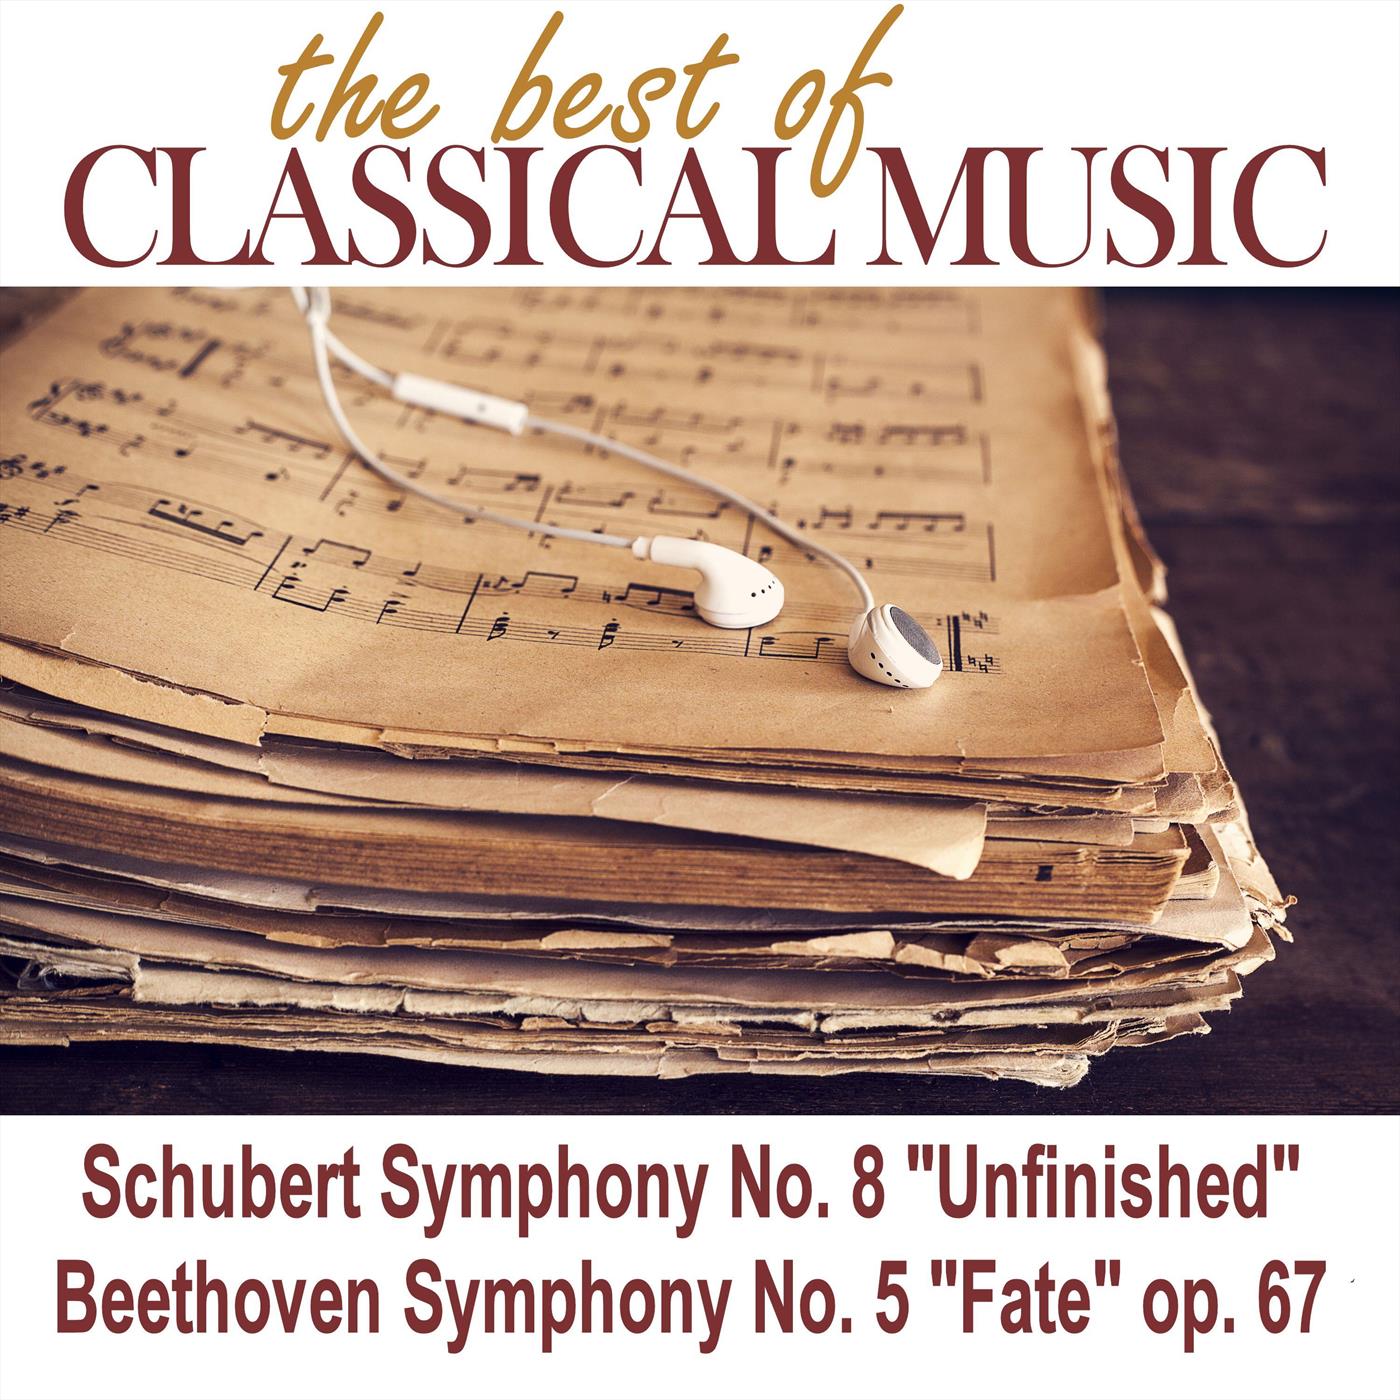 The Best of Classical Music / Schubert "Symphony No. 8 "Unfinished"/ Beethoven "Symphony No. 5 "Fate" op. 67